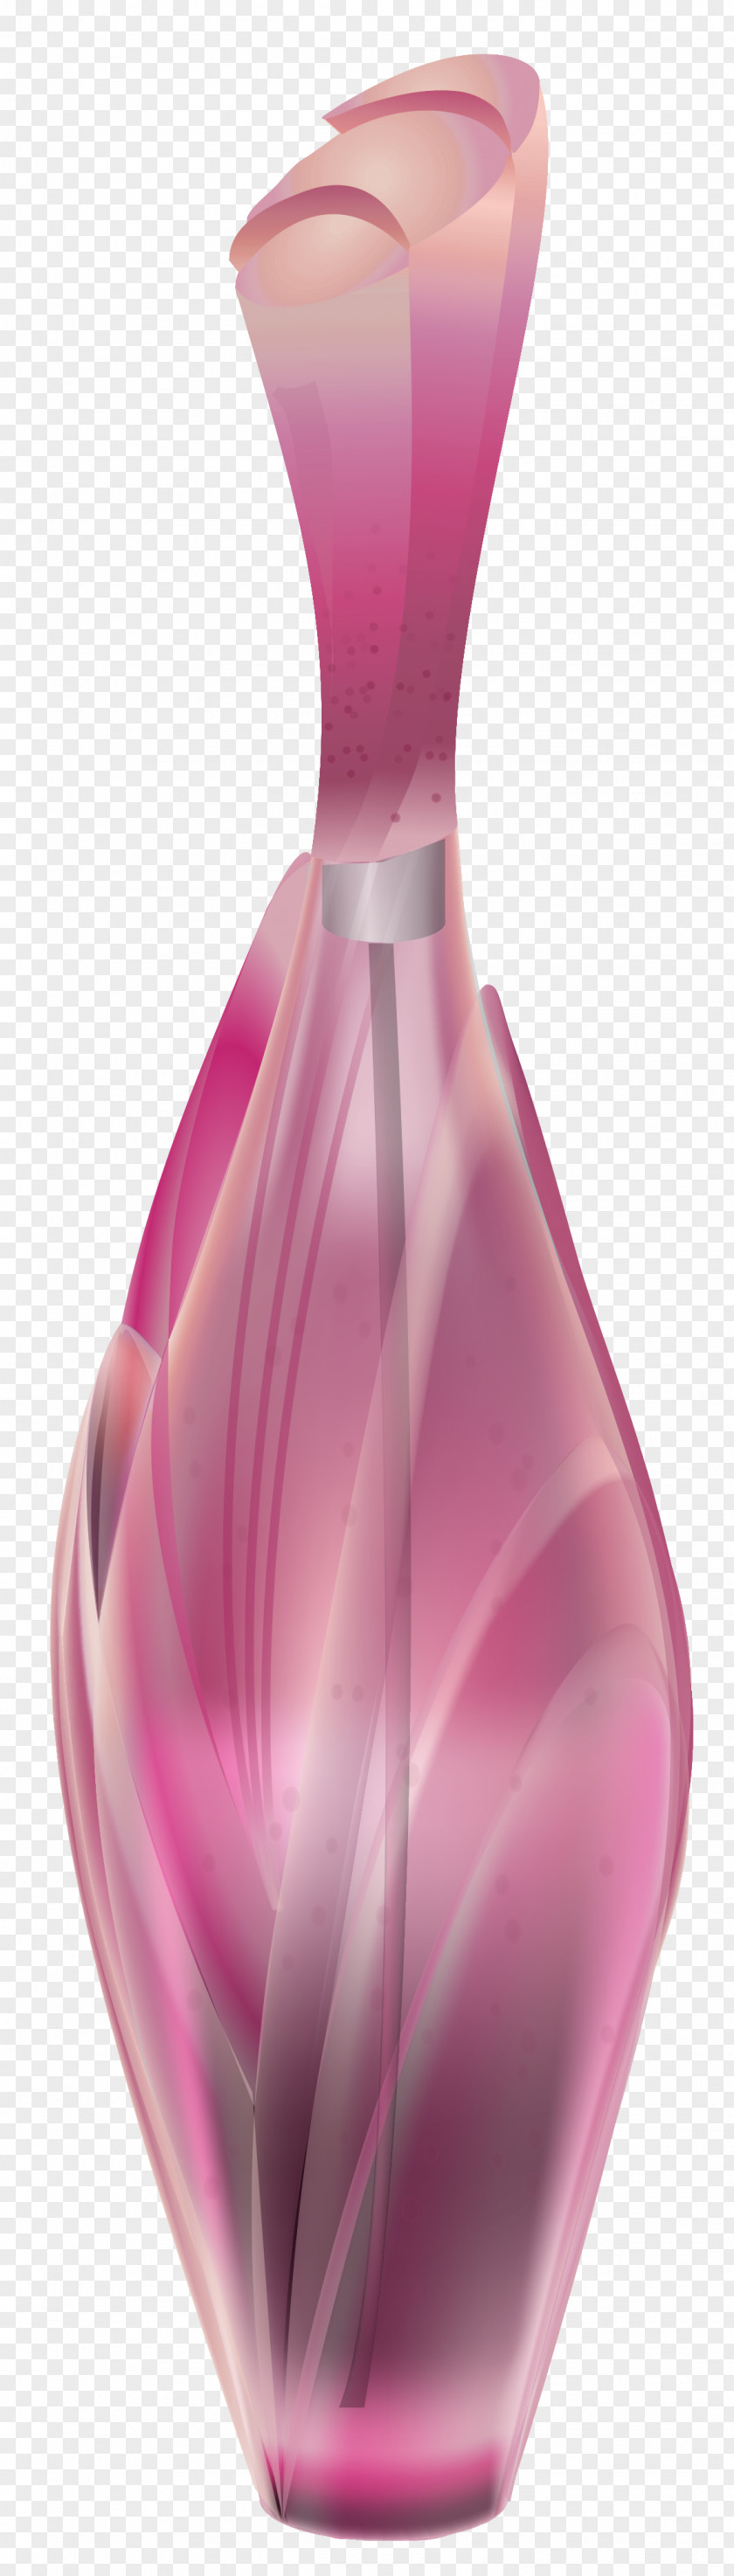 Perfume Bottle Clipart Picture Chanel No. 5 PNG